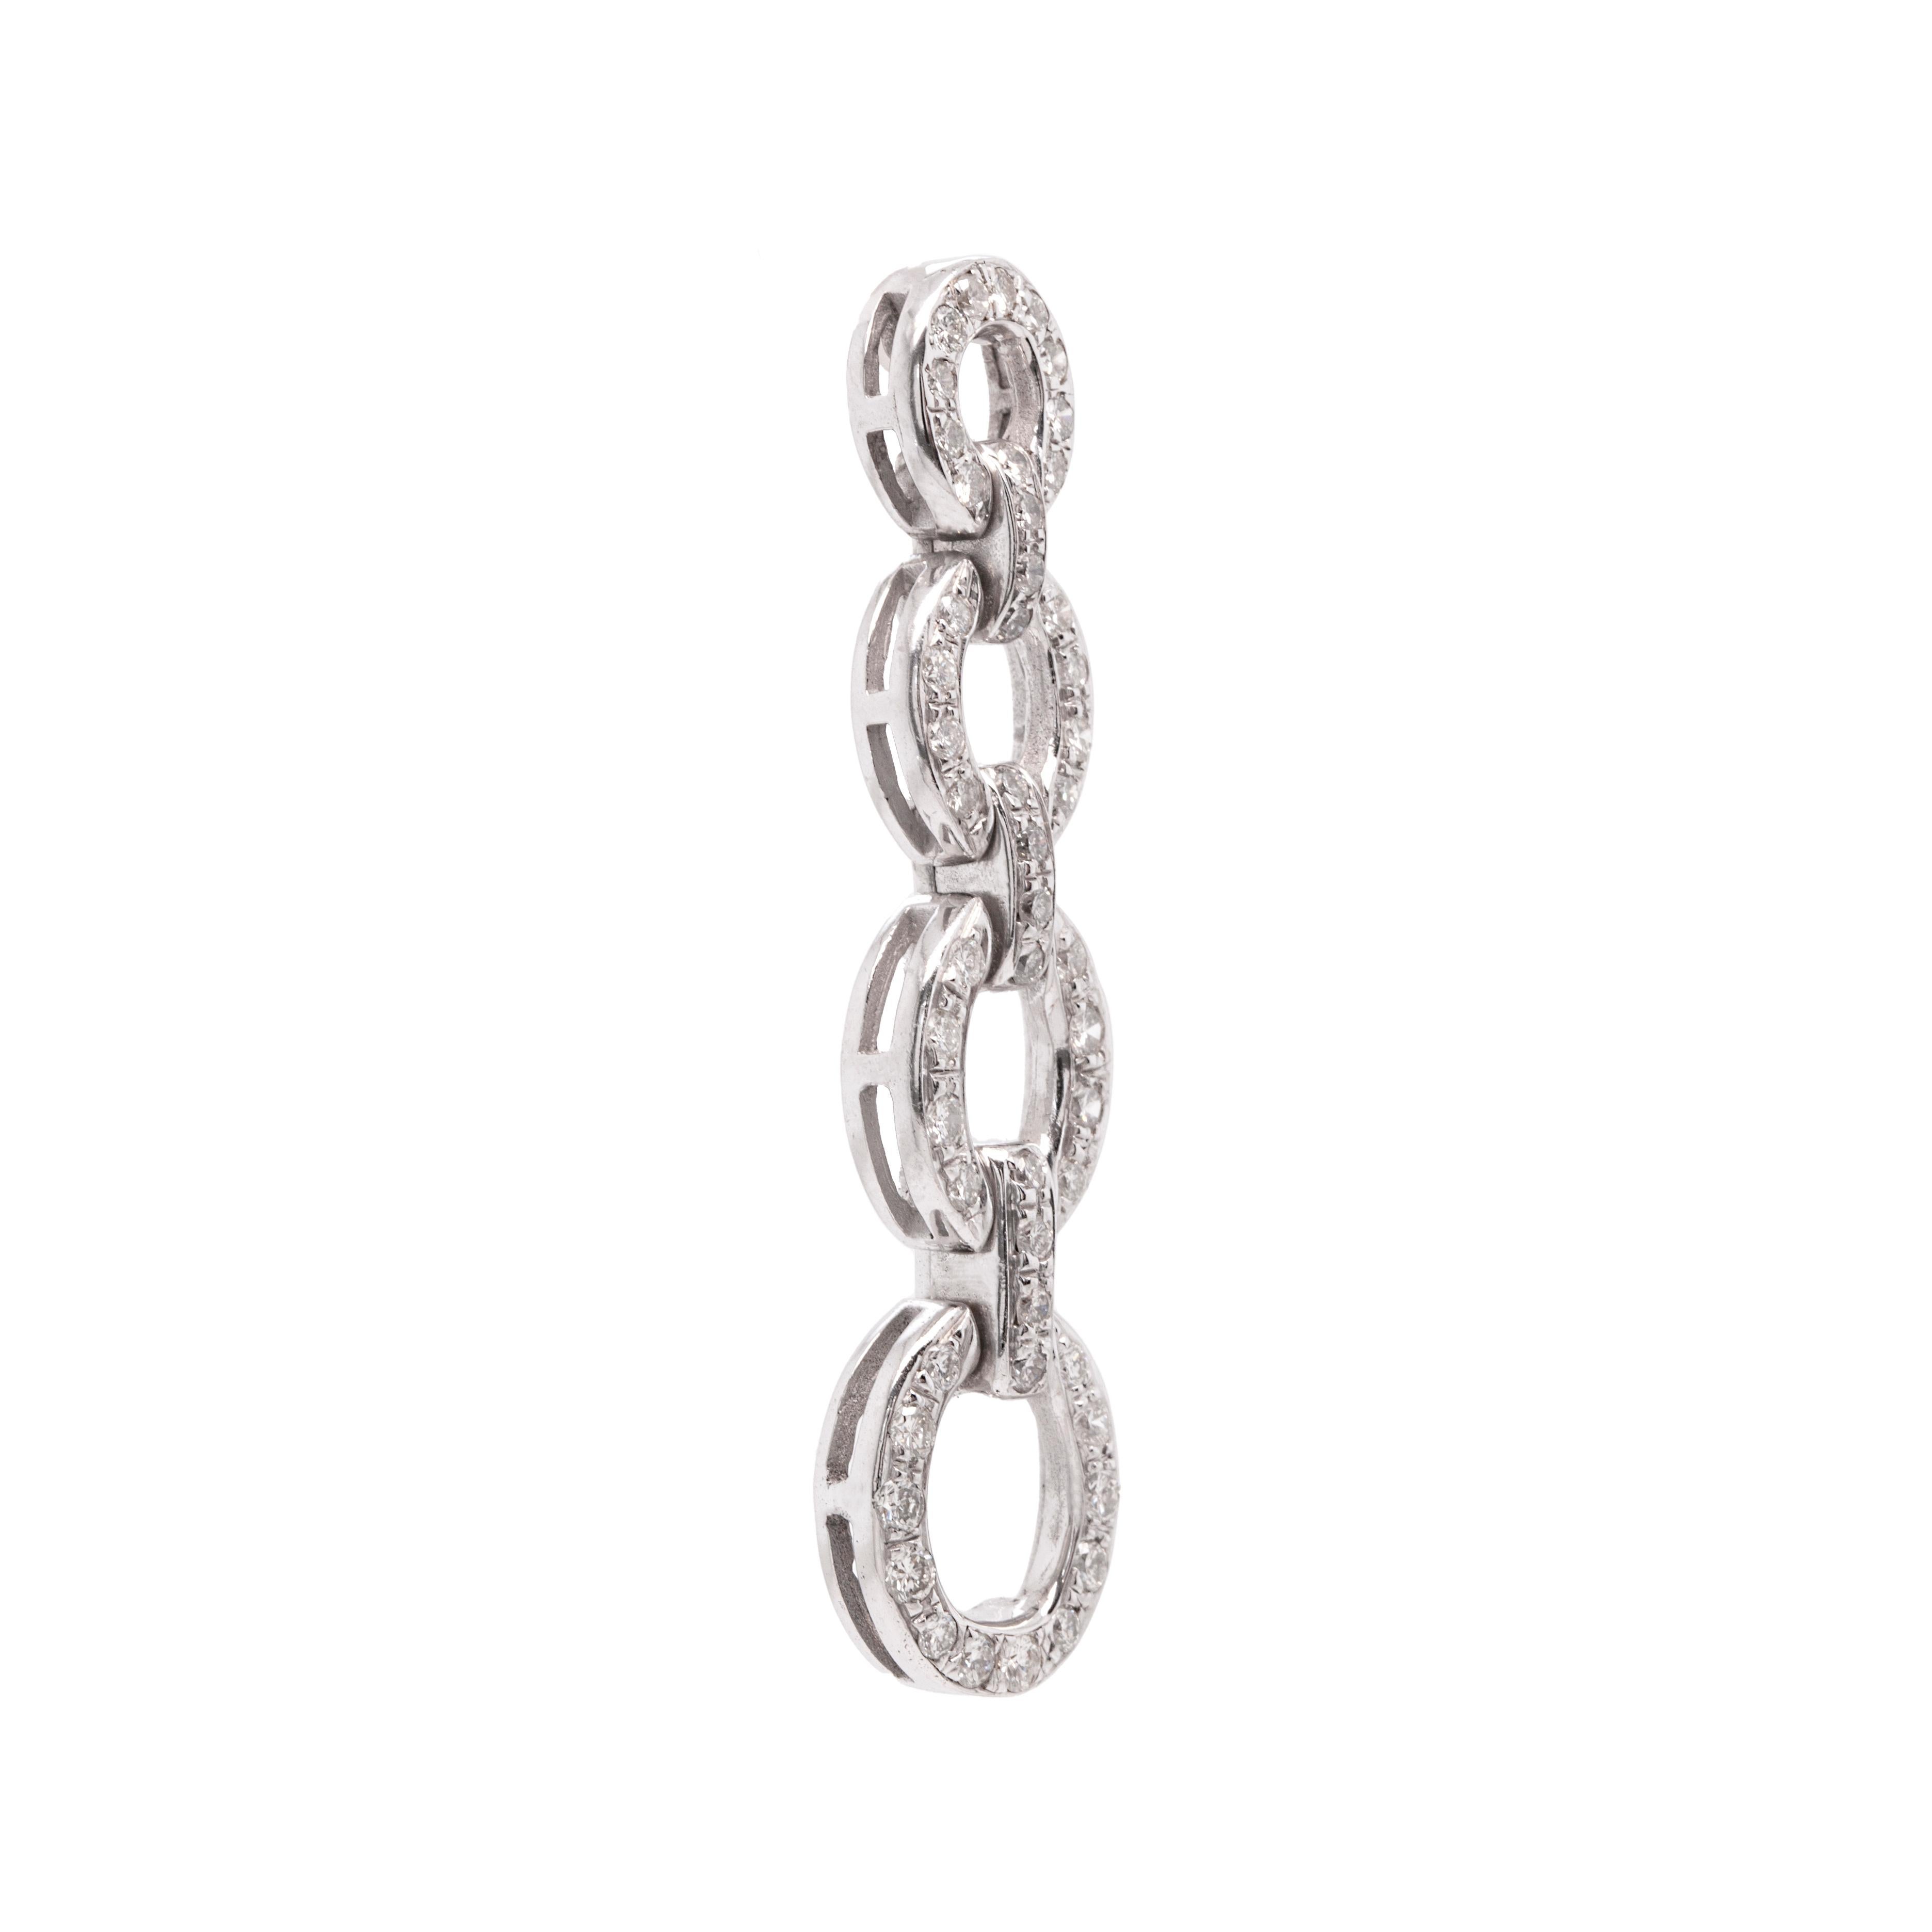 These exquisite 18 carat white gold earrings feature 4 graduating oval shaped links, beautifully alternating with bar links, all pavé set with fine quality round brilliant cut diamonds totalling to approximately 2.20ct. The delicate movements of the